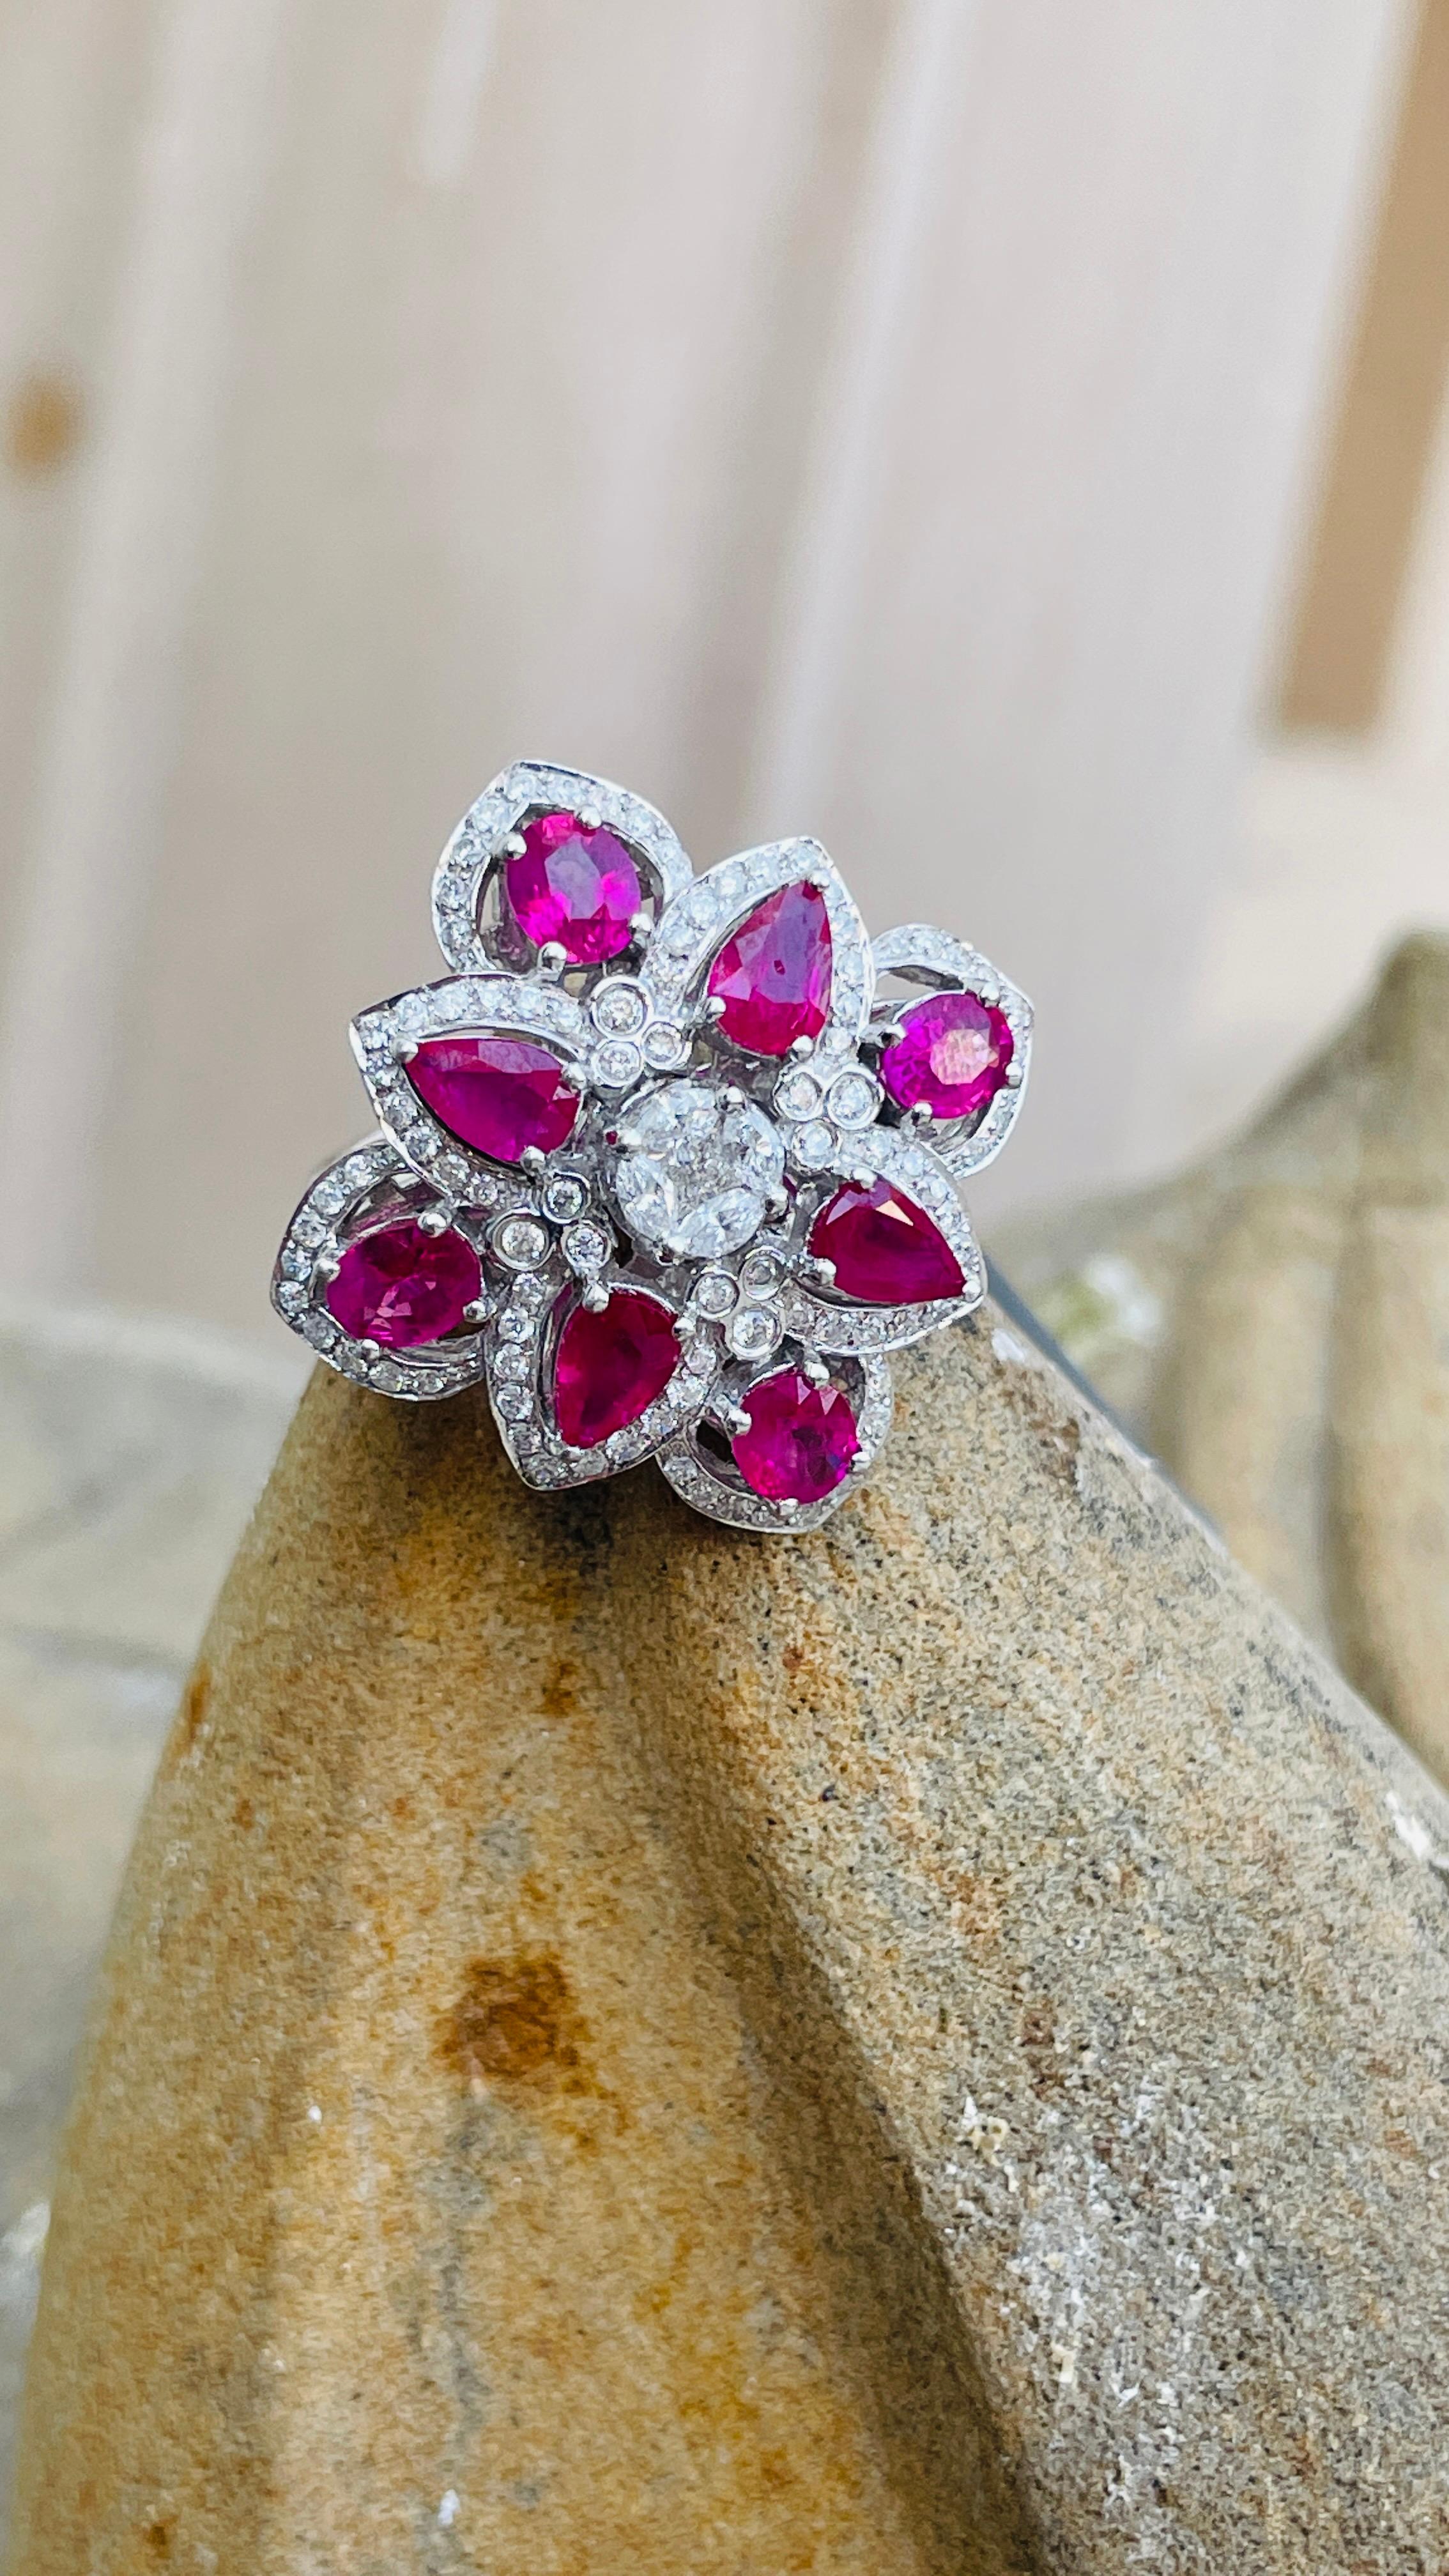 For Sale:  3.45 Carat Ruby and Diamond White Gold Ring in 14 Karat White Gold  2